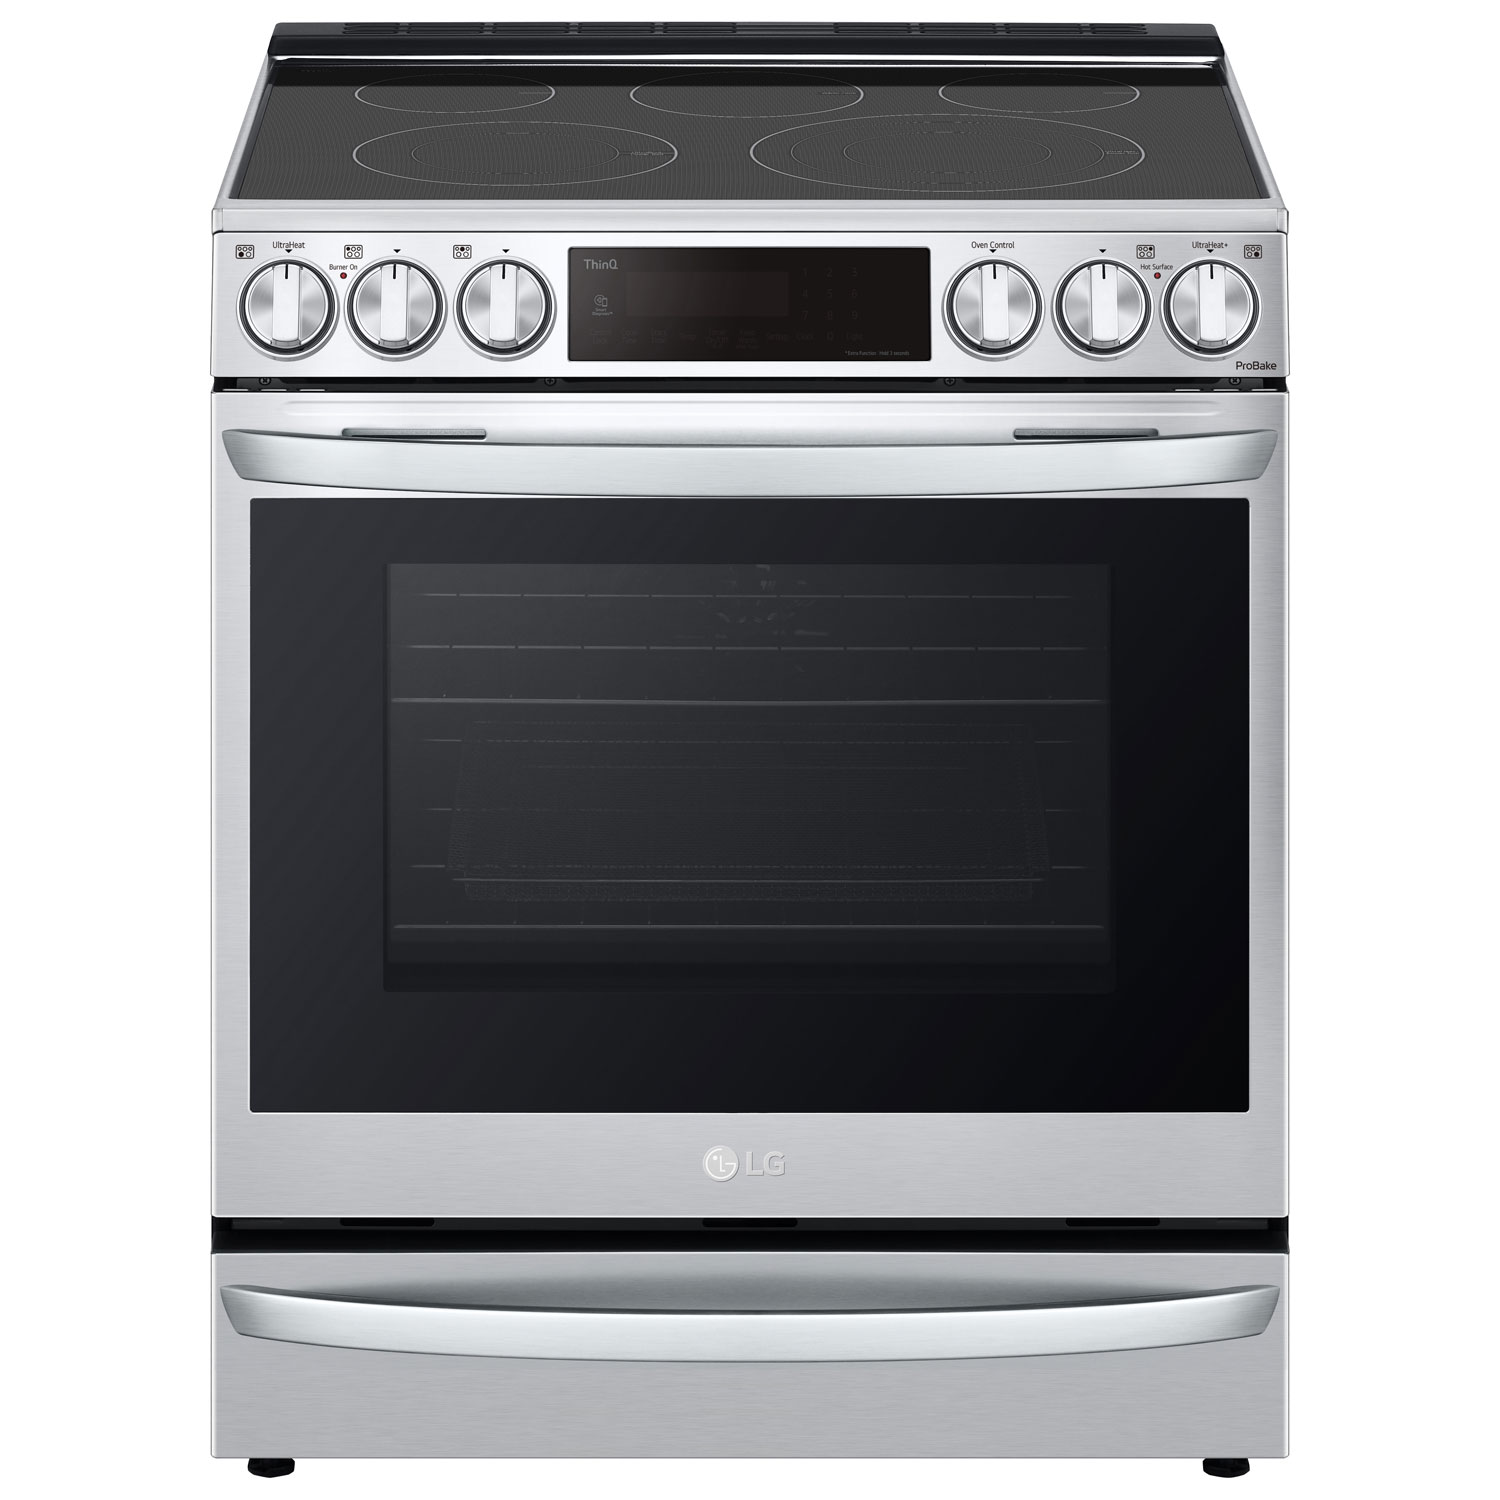 LG 30" 6.3 Cu. Ft. True Convection 5-Element Slide-In Electric Air Fry Range (LSEL6337F) - Stainless